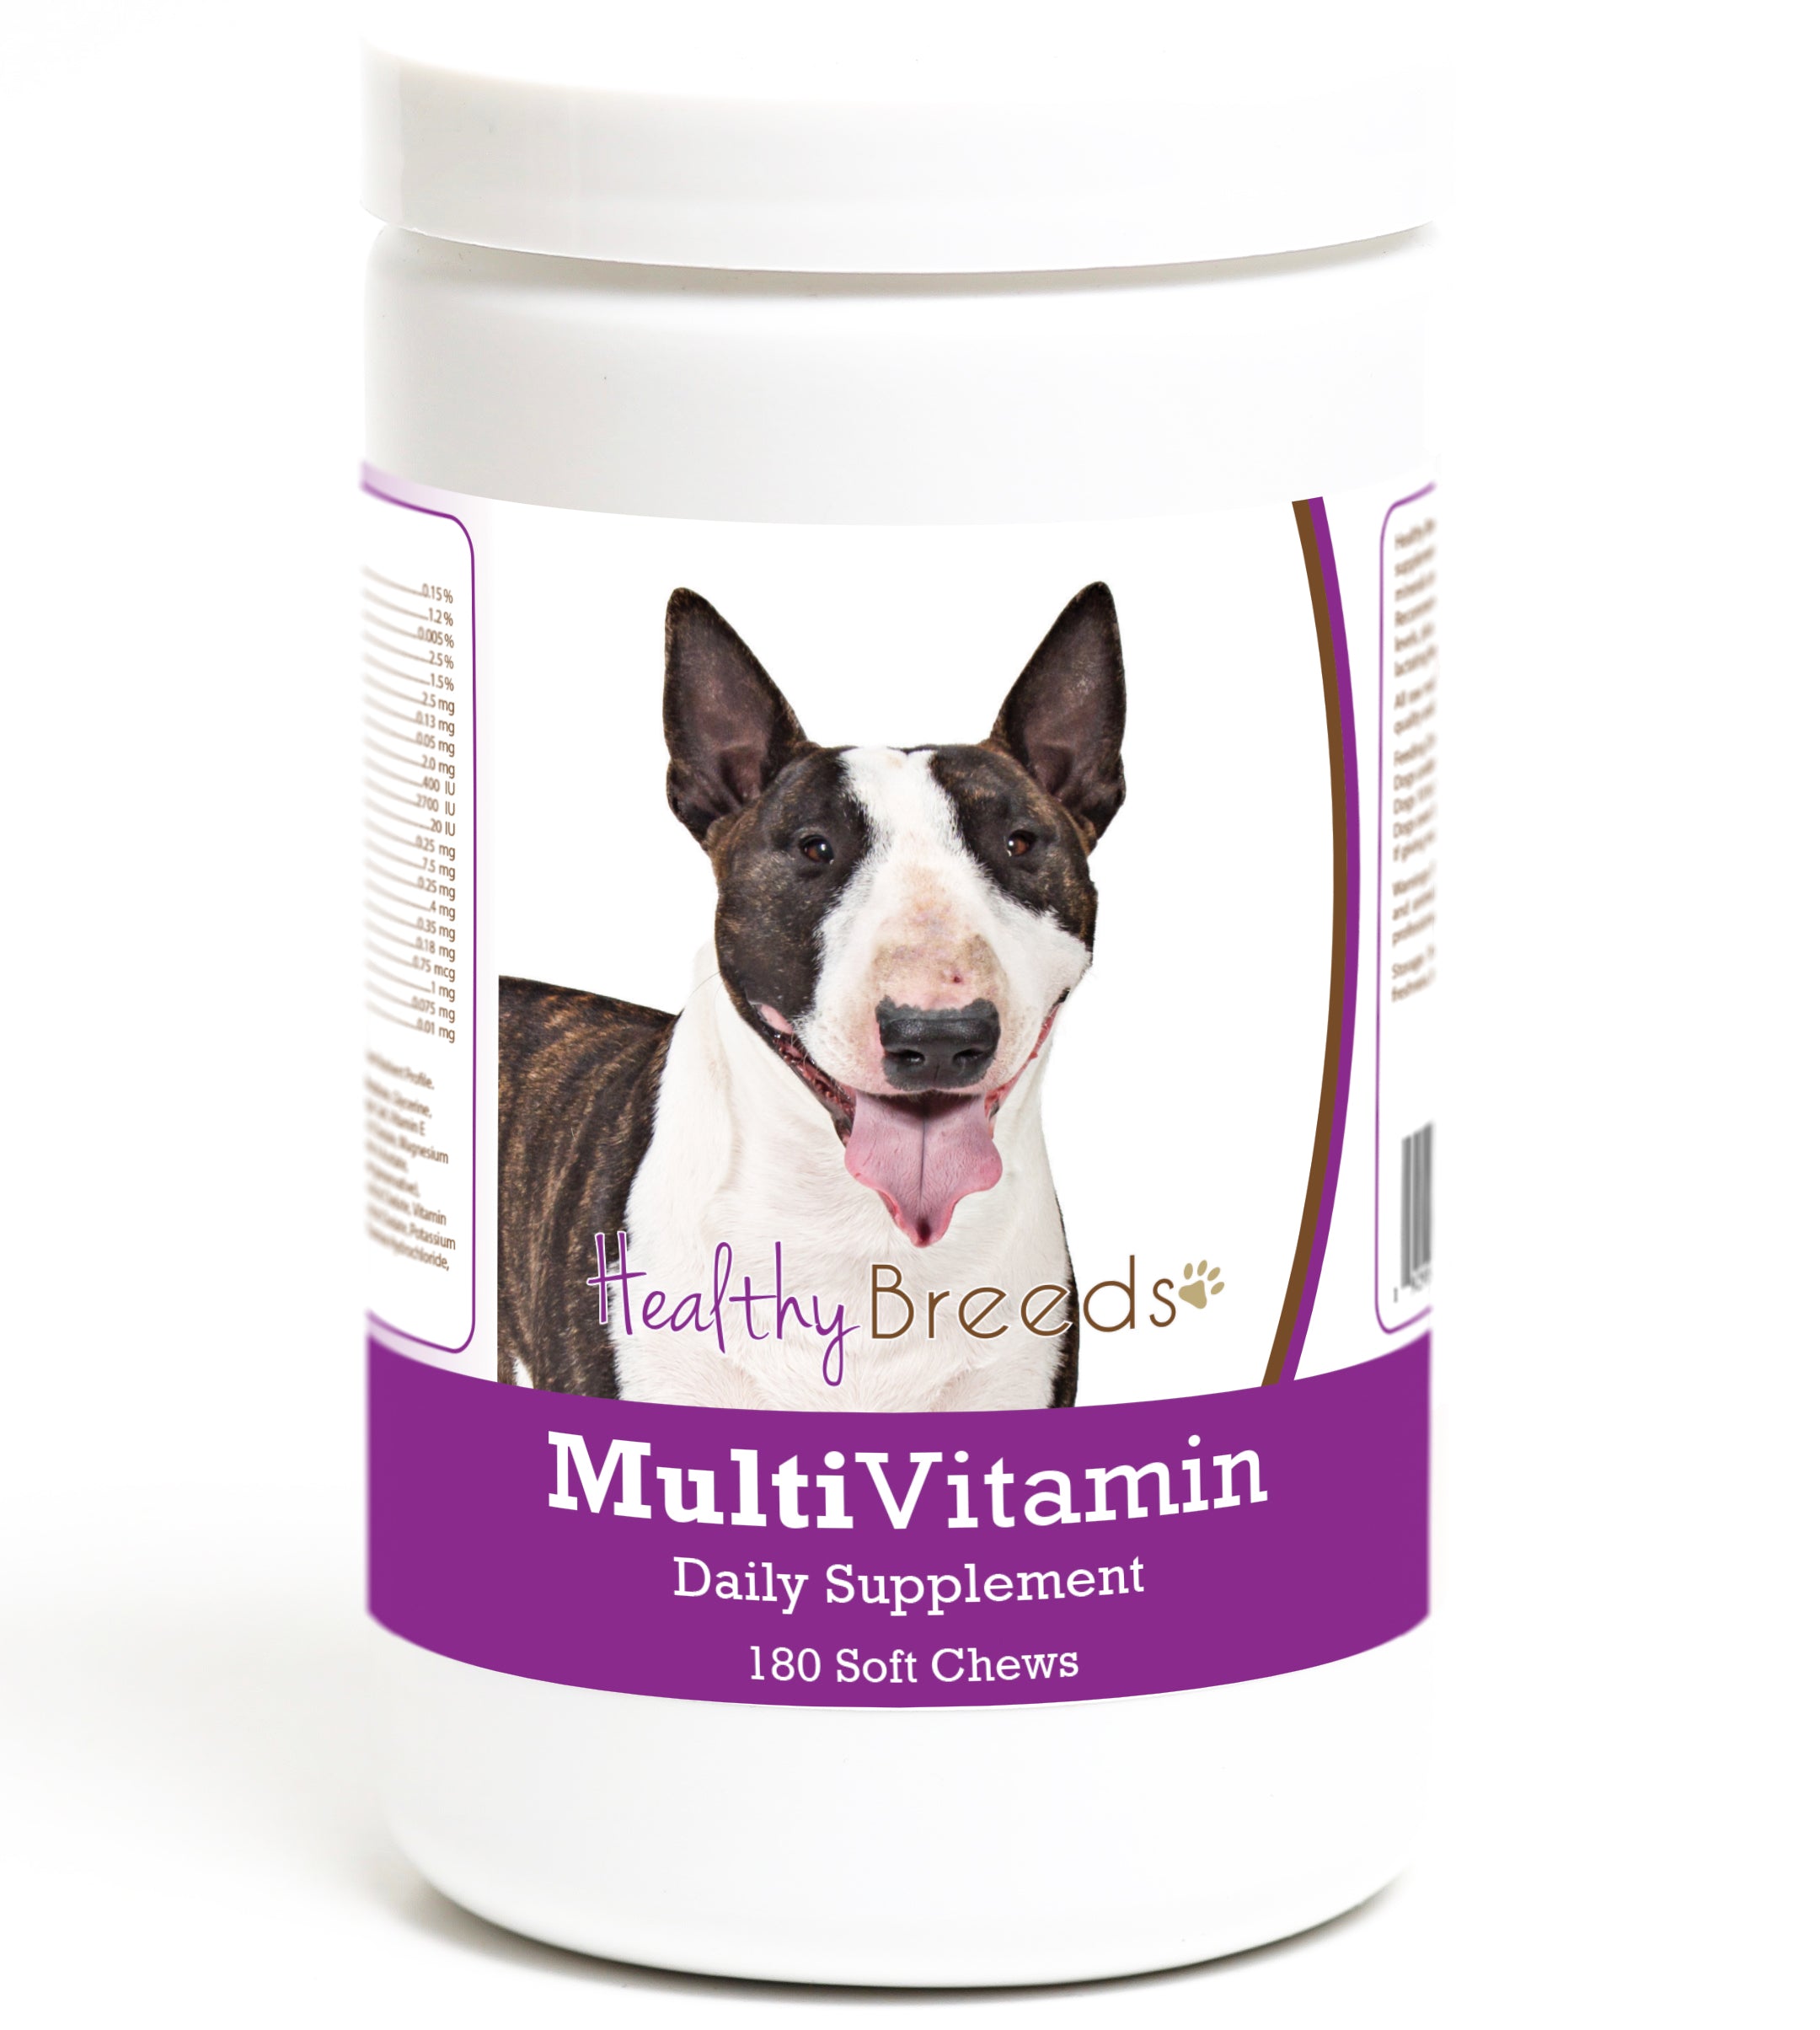 Miniature Bull Terrier Multivitamin Soft Chew for Dogs 180 Count